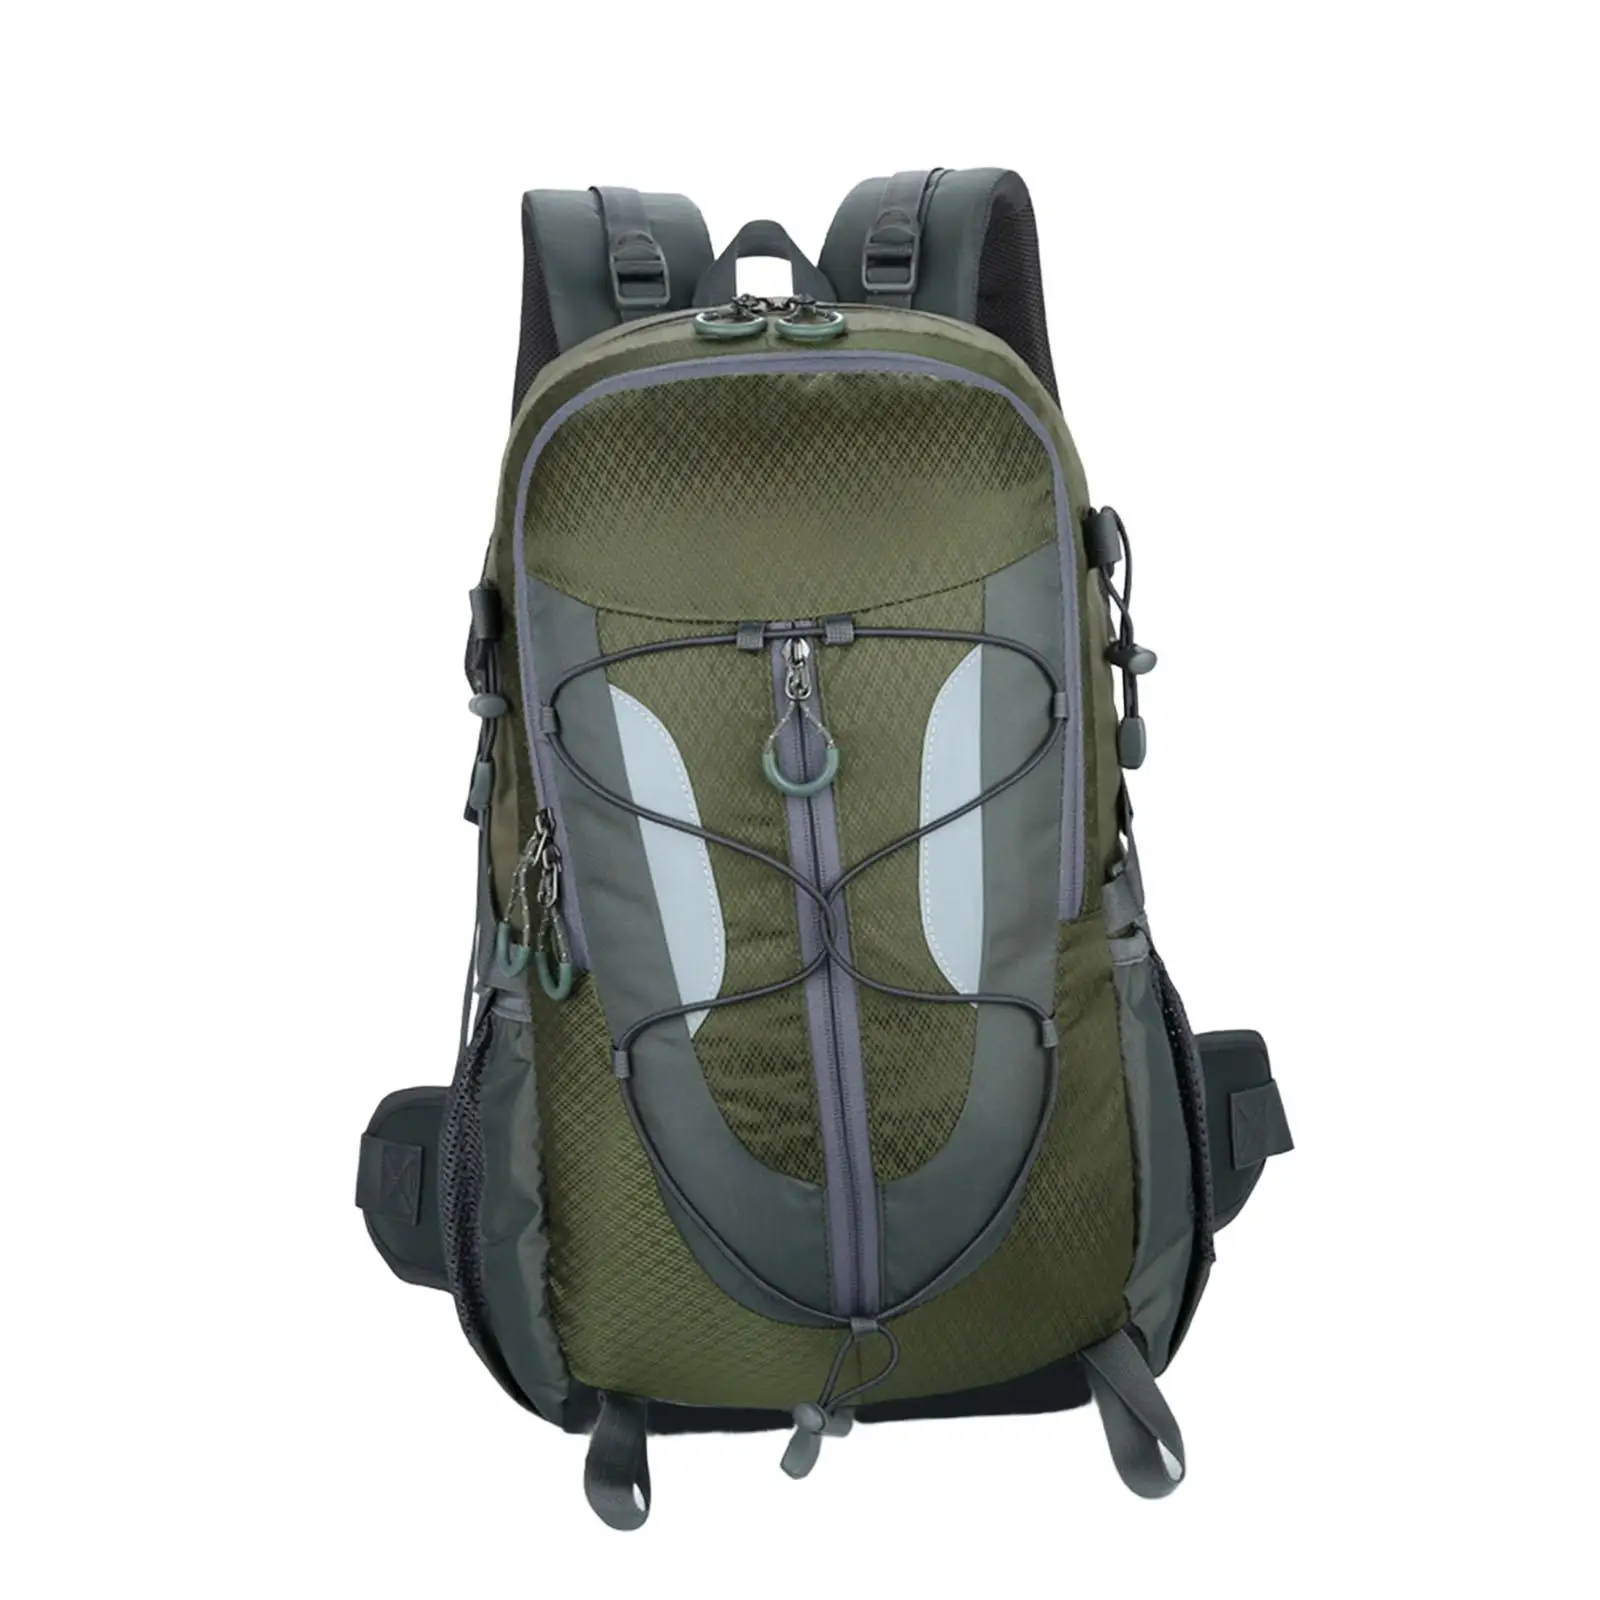 Hiking Backpack Water Resistant Large Capacity Multipurpose Outdoor Daypack for Survival Hunting Cycling Mountaineering Trekking